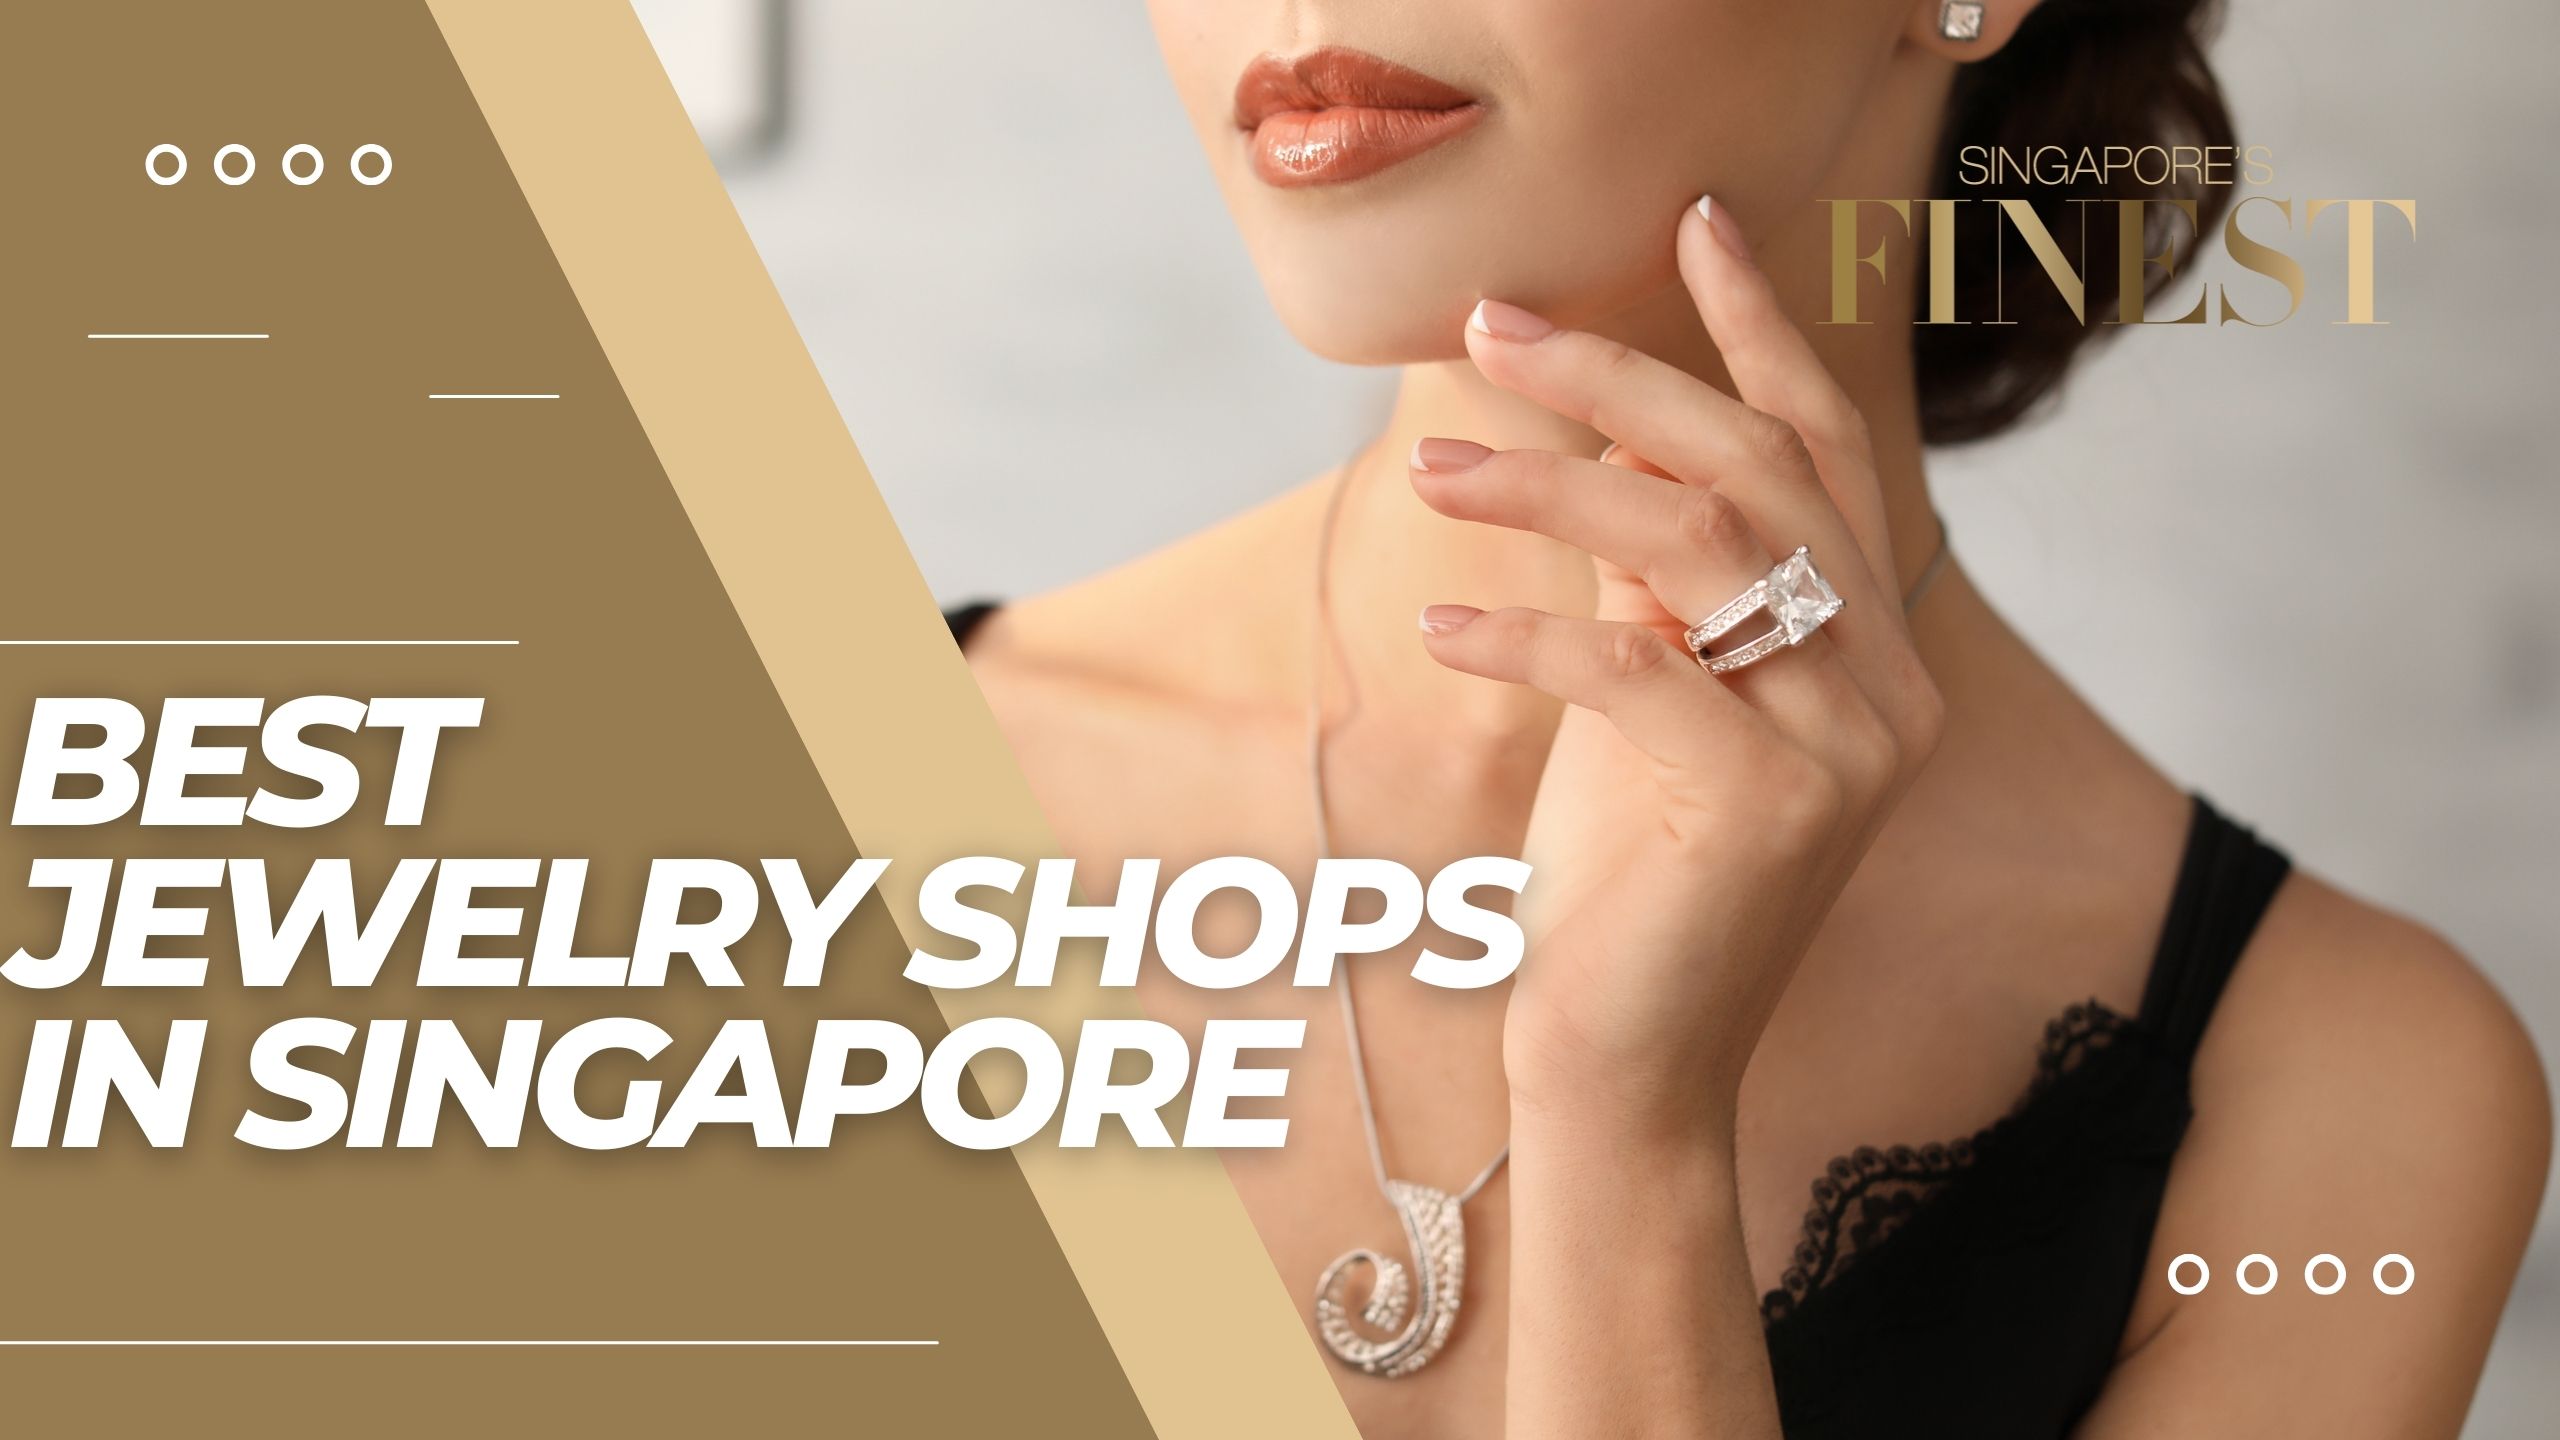 The Finest Jewelry Shops in Singapore